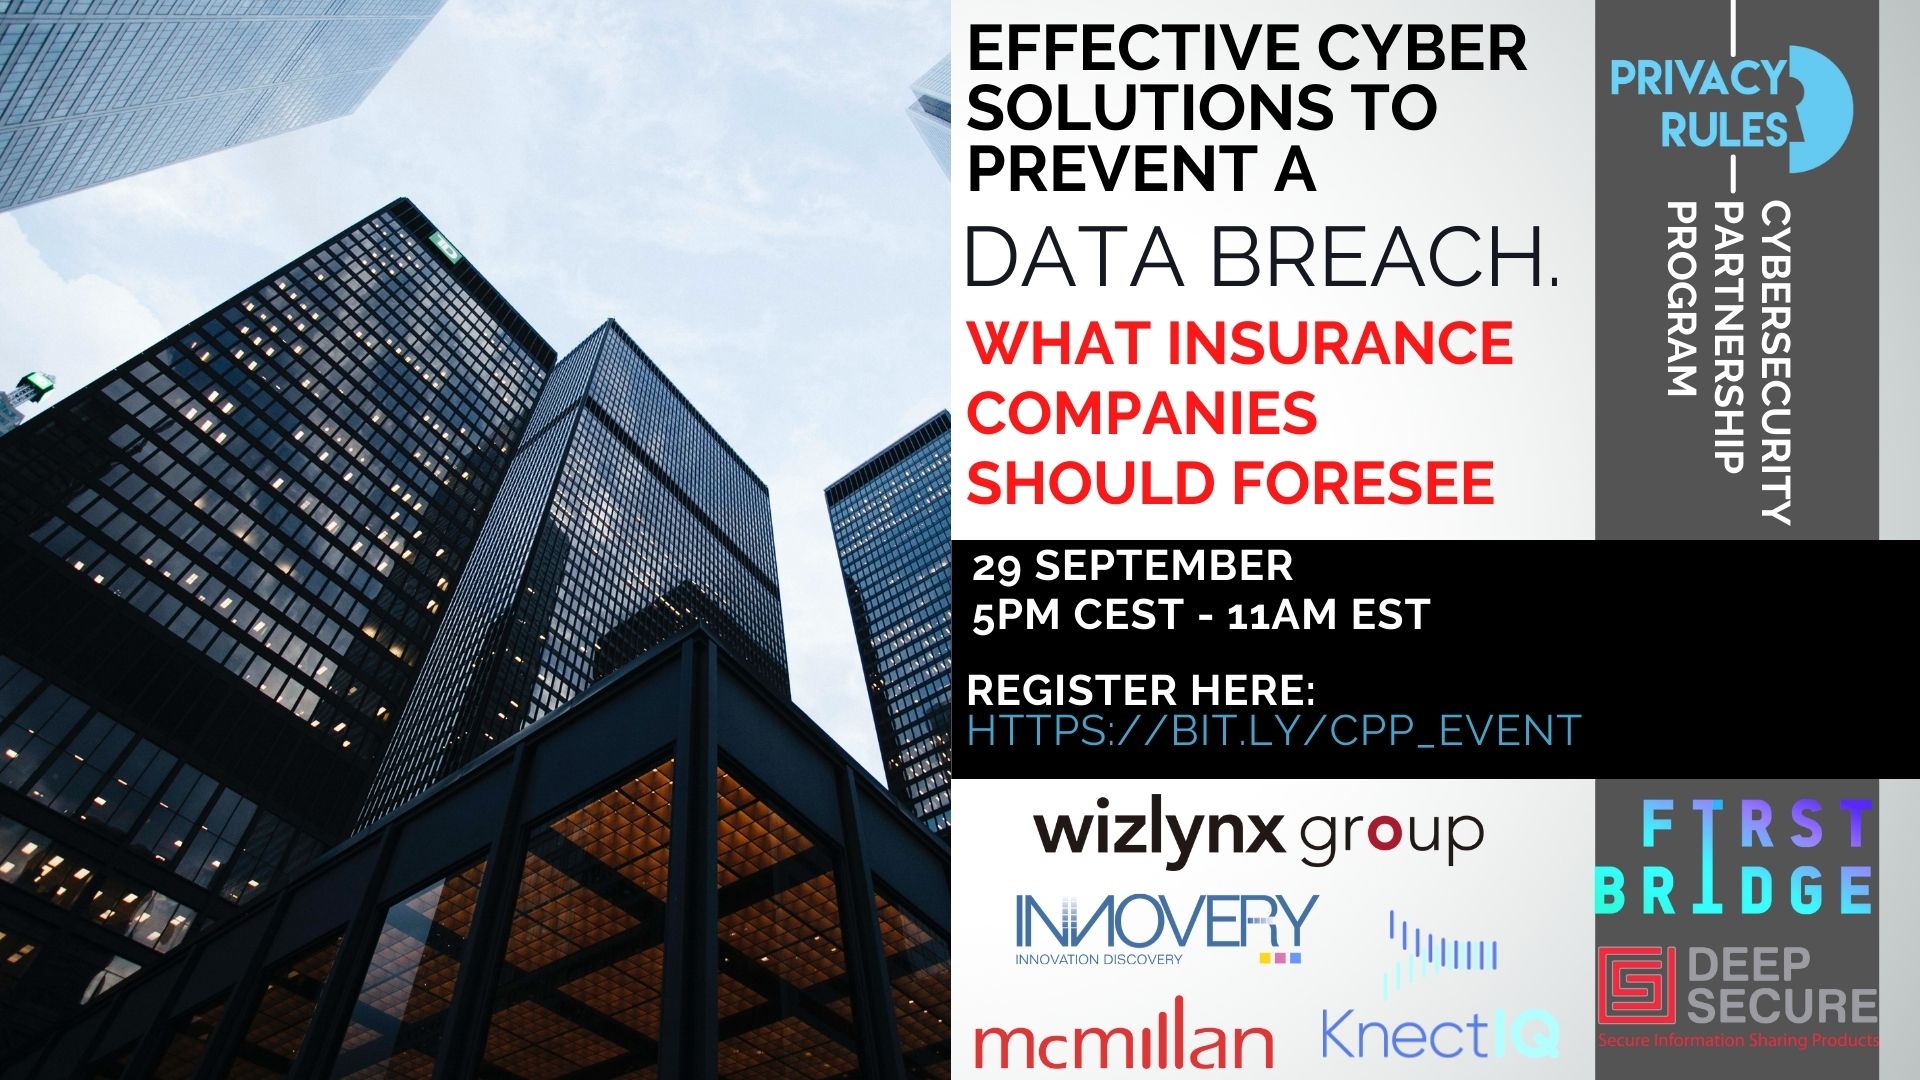 Cyber solutions to prevent a data breach